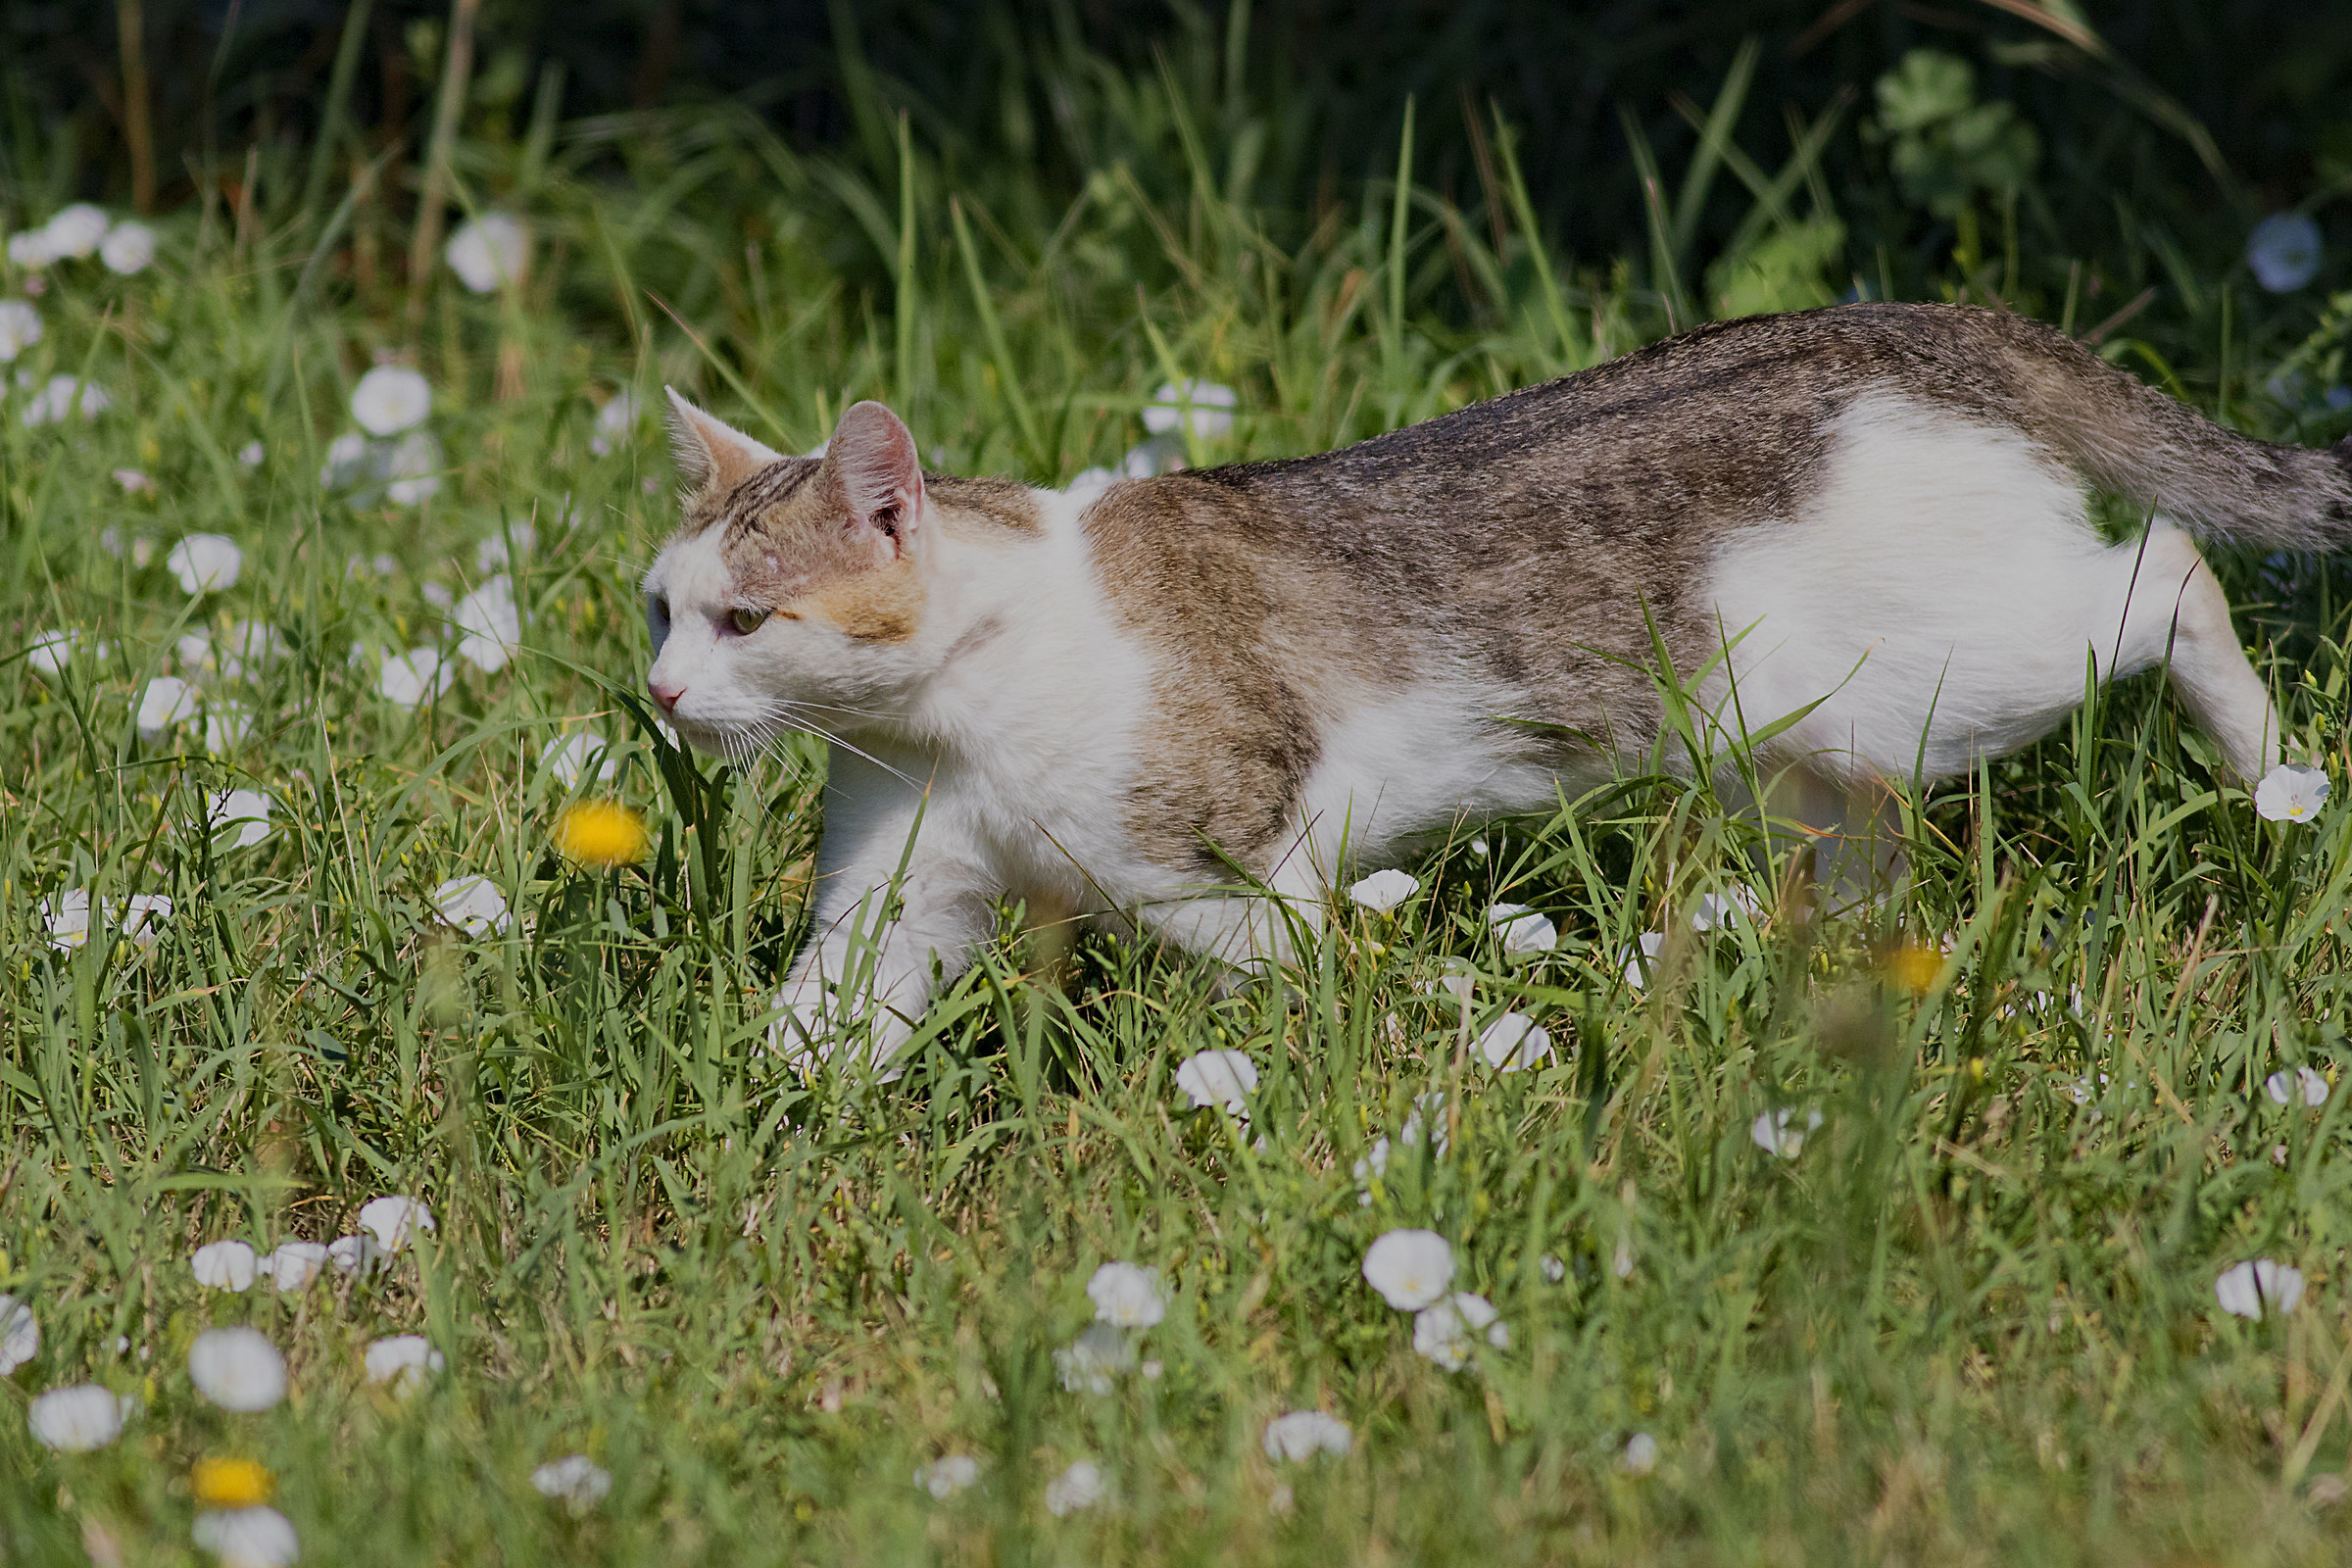 Hunting among the flowers...